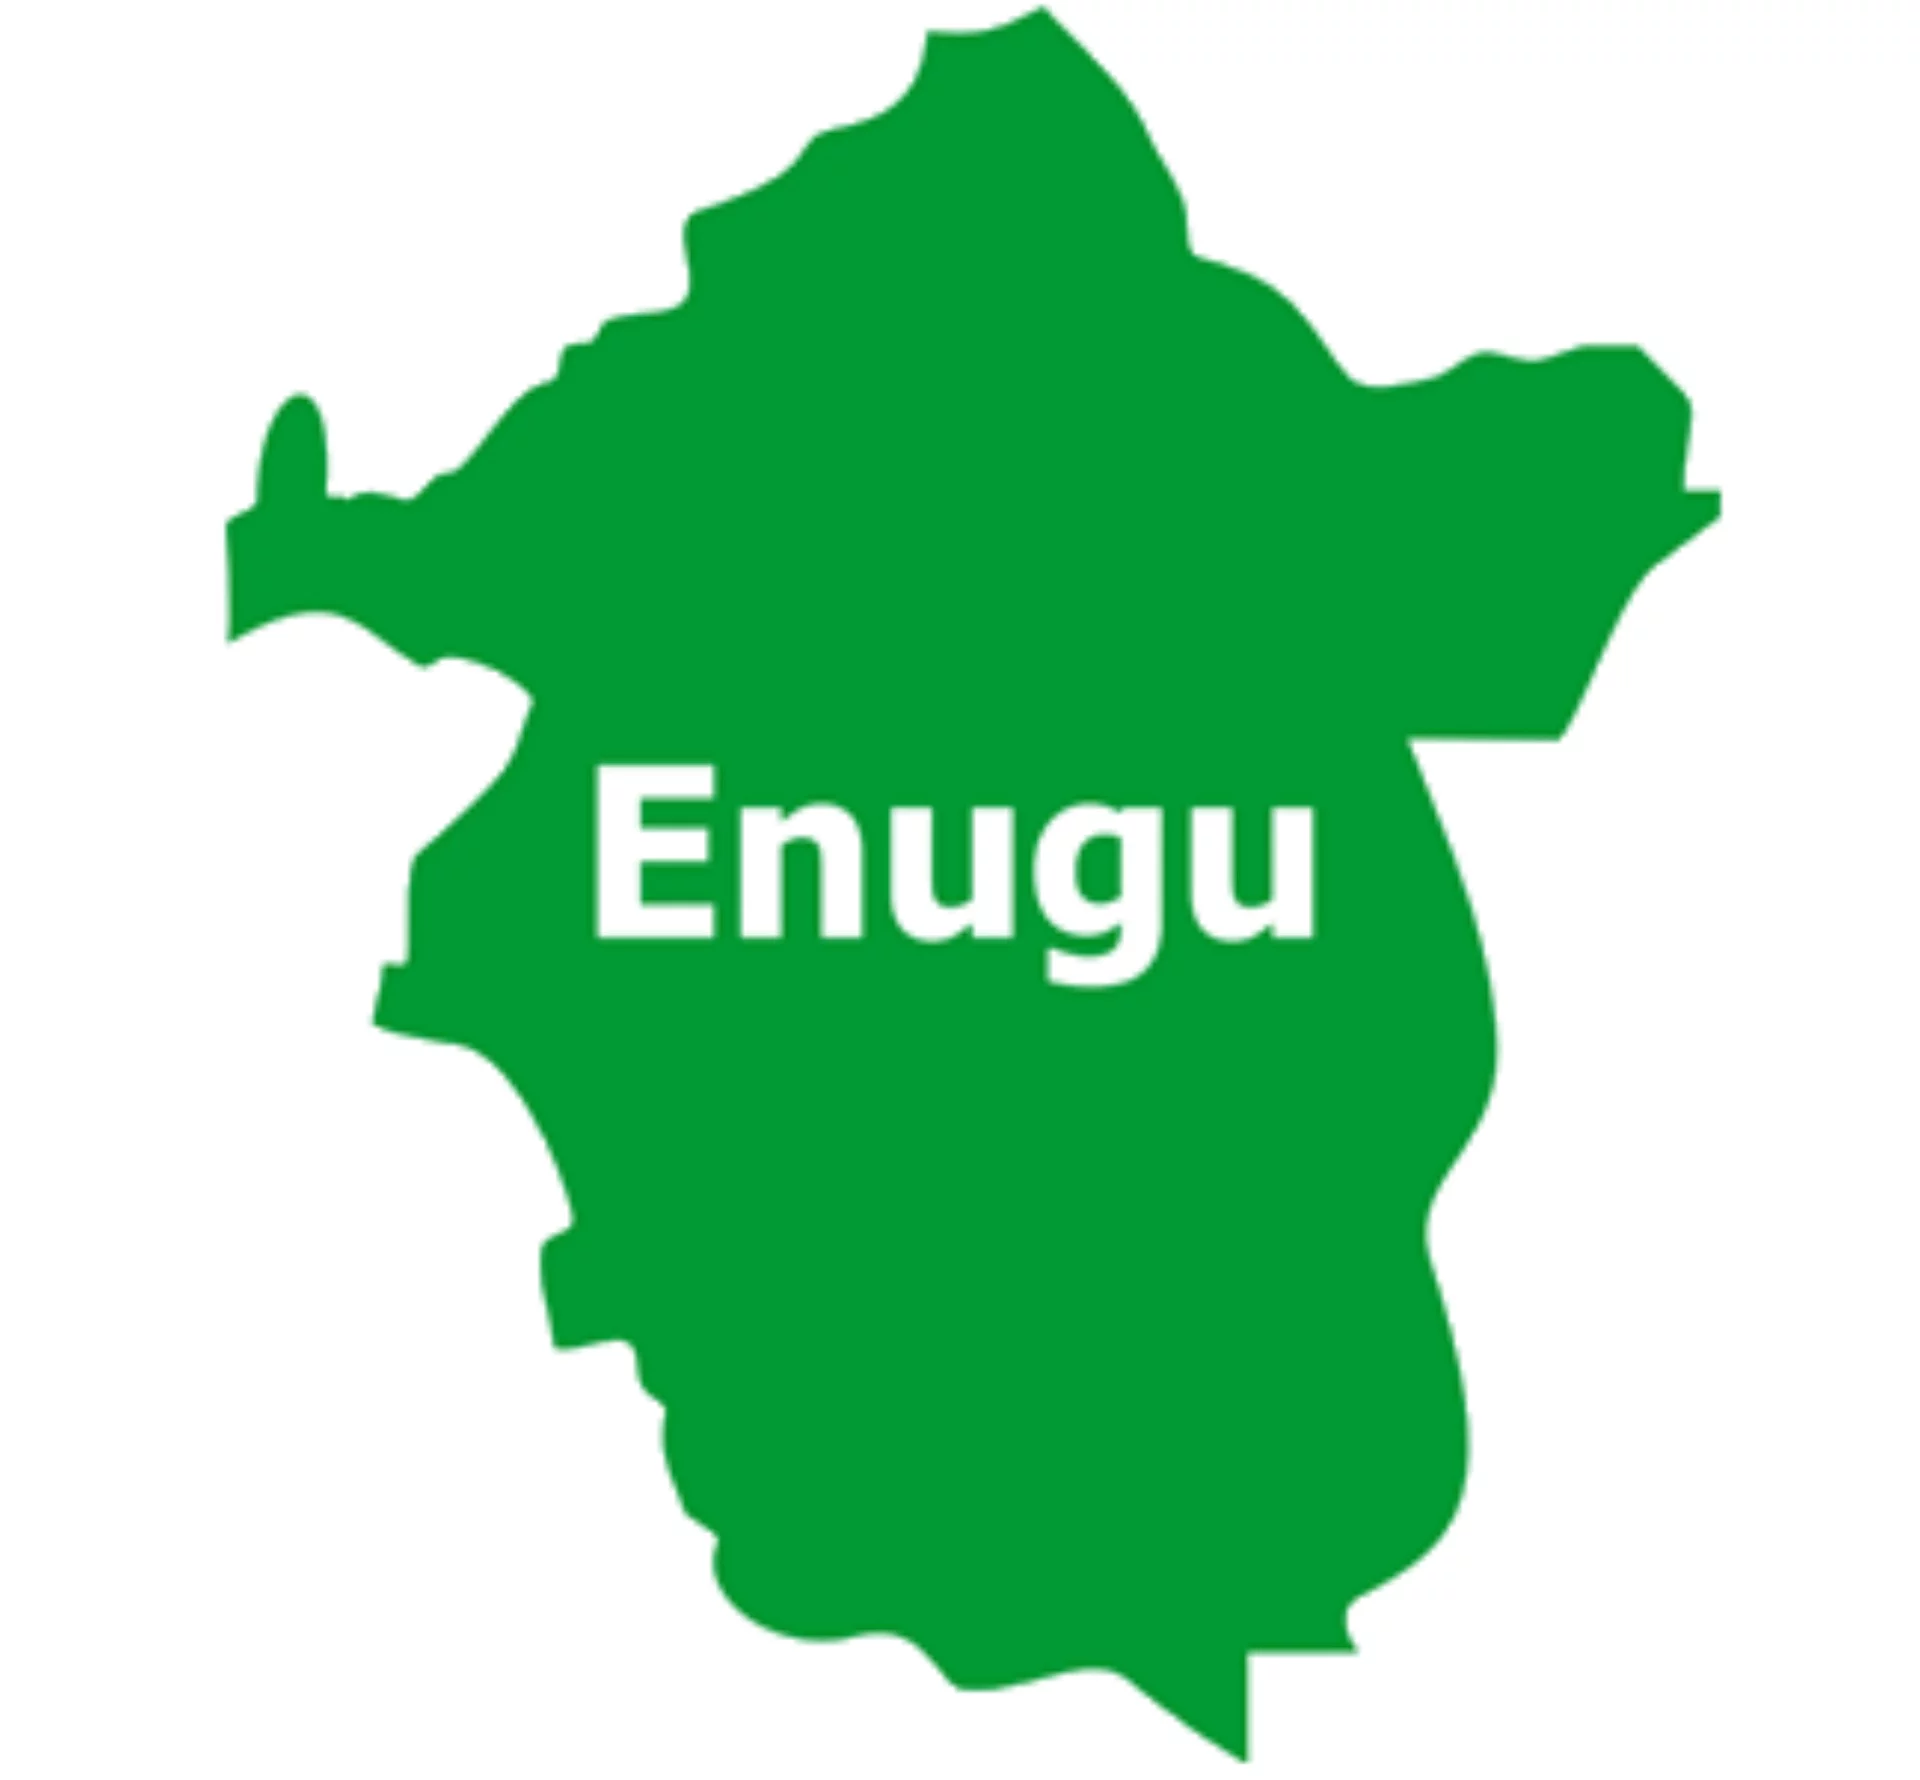 Centenary city crisis: Enugu community drags police and others to parliament